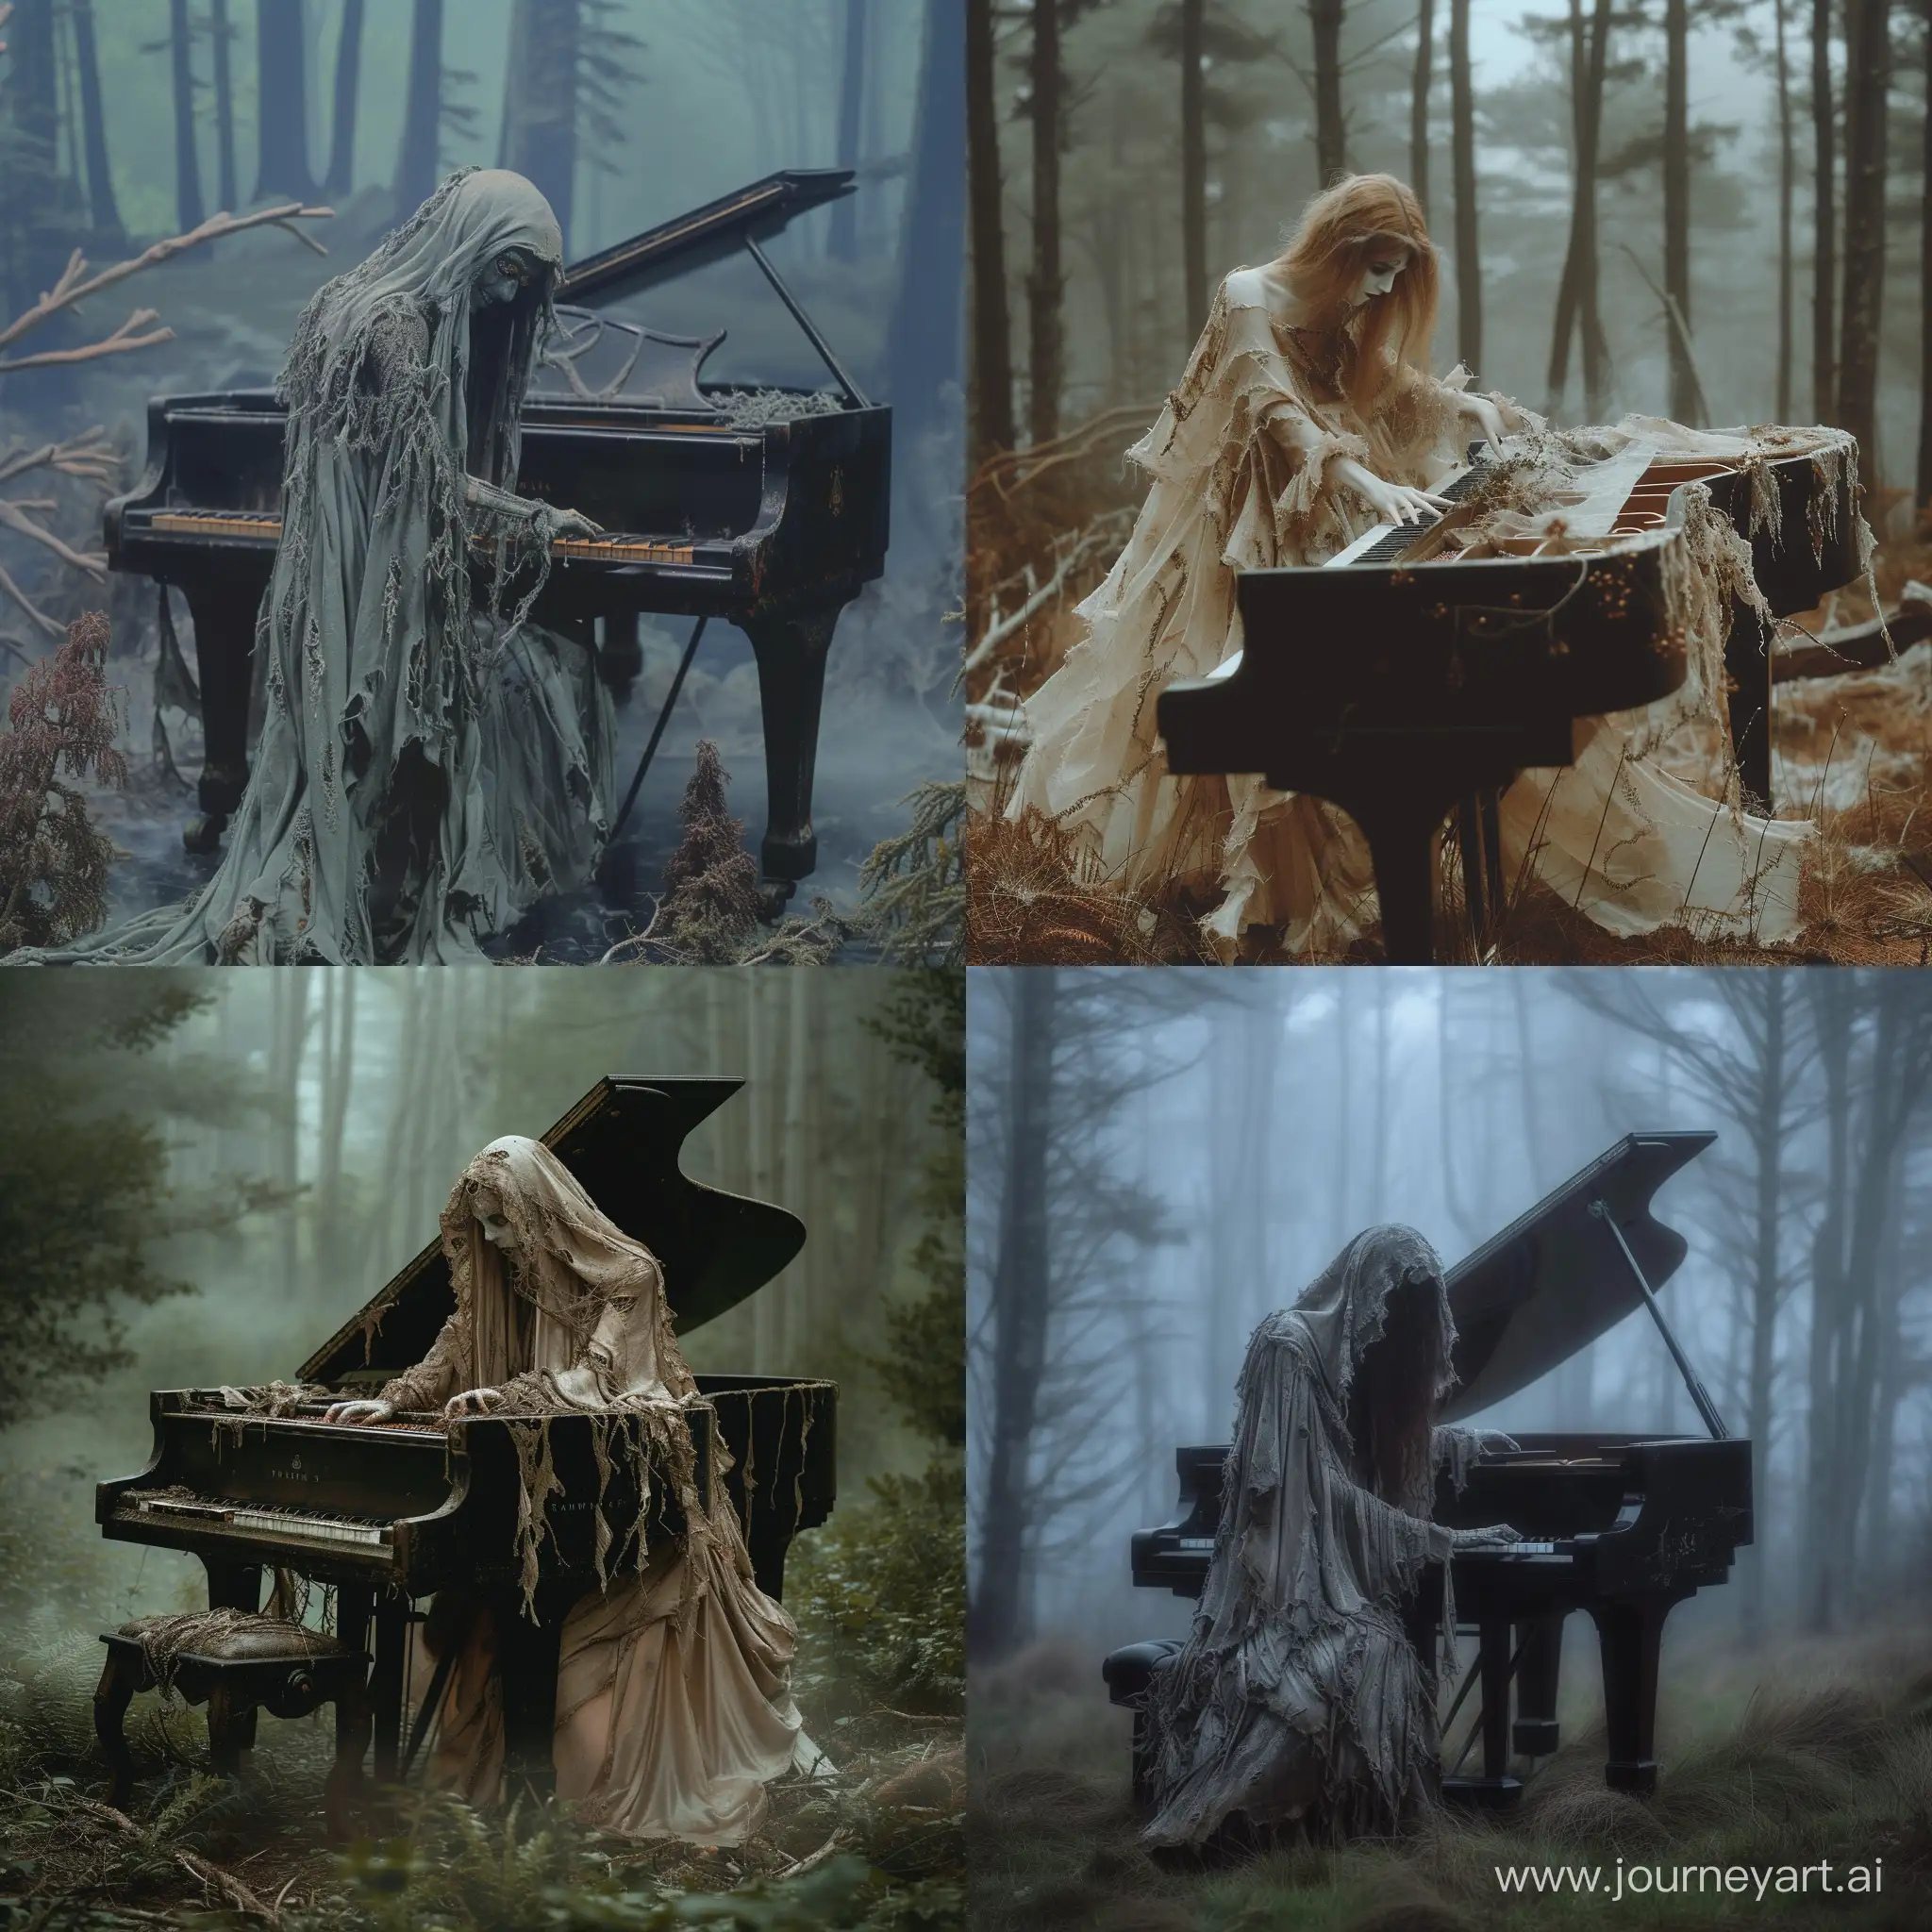 Ephemeral, ghostly apparitions of a beautiful spectral woman, dressed in flowing, tattered garments playing a grand piano in a creepy misty forest, attention to detail, taken on provia 